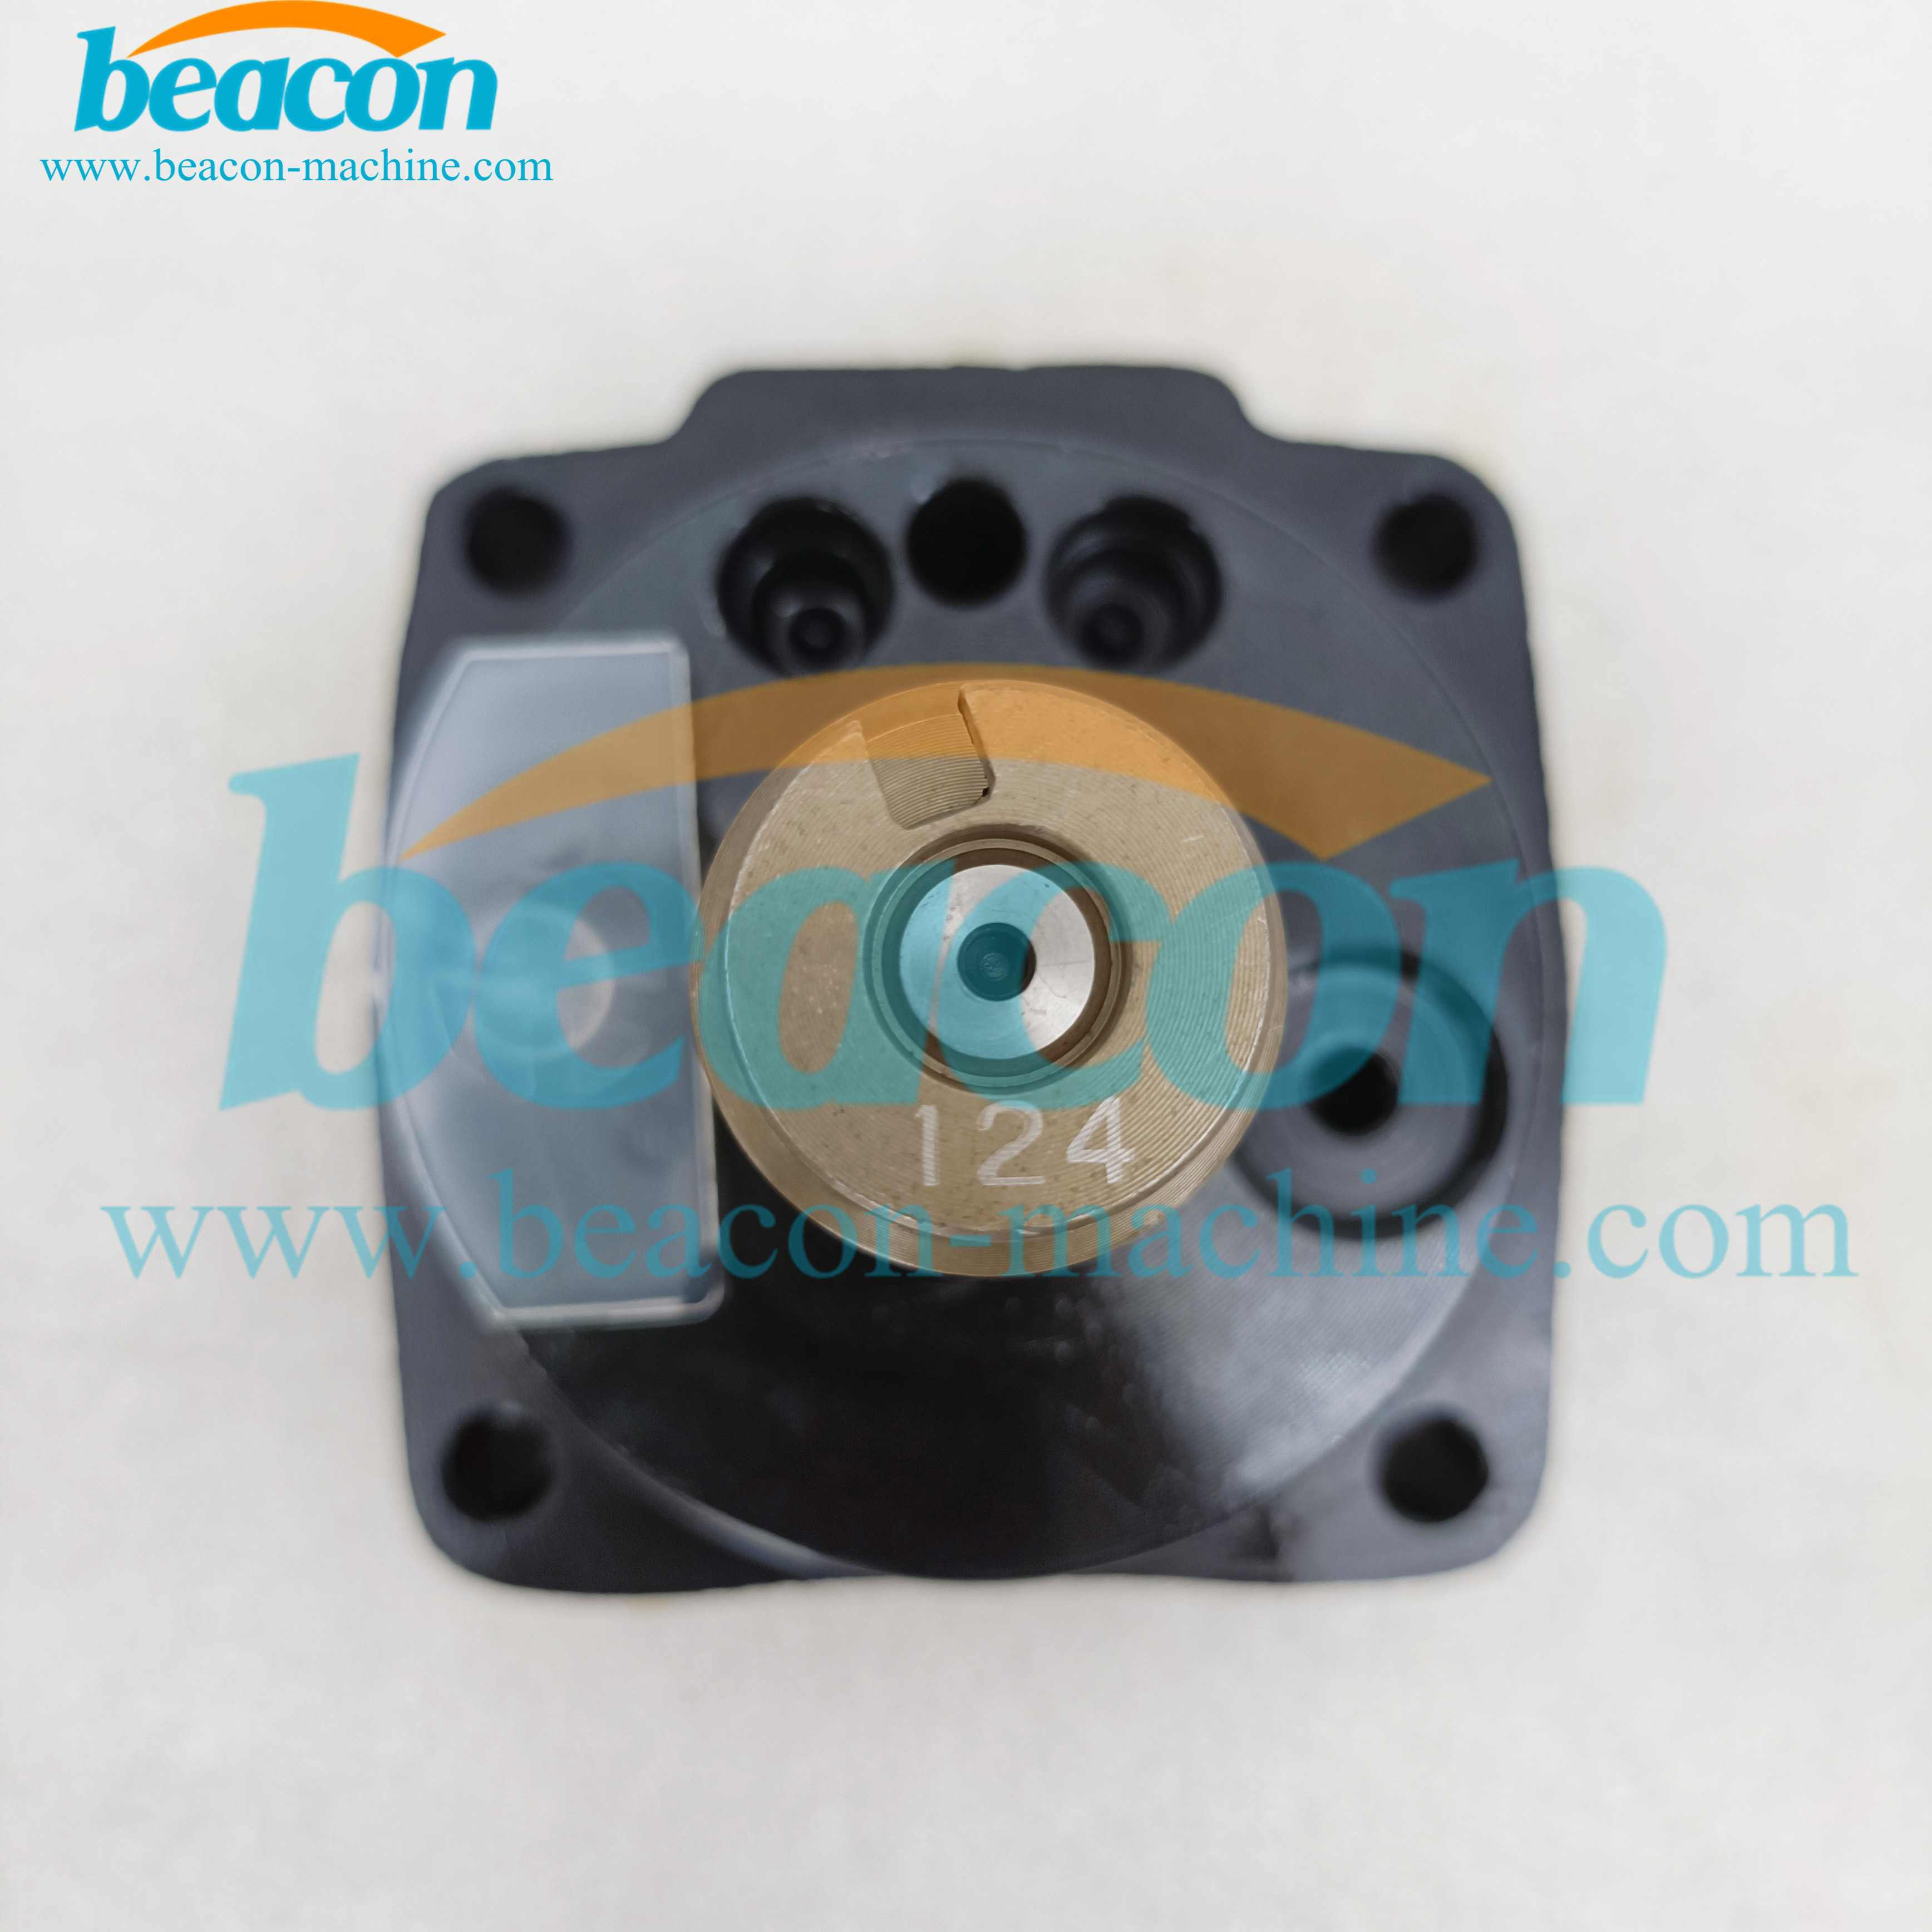 096400-1240 4 cylinder diesel fuel pump head rotor for 14B pump spare parts